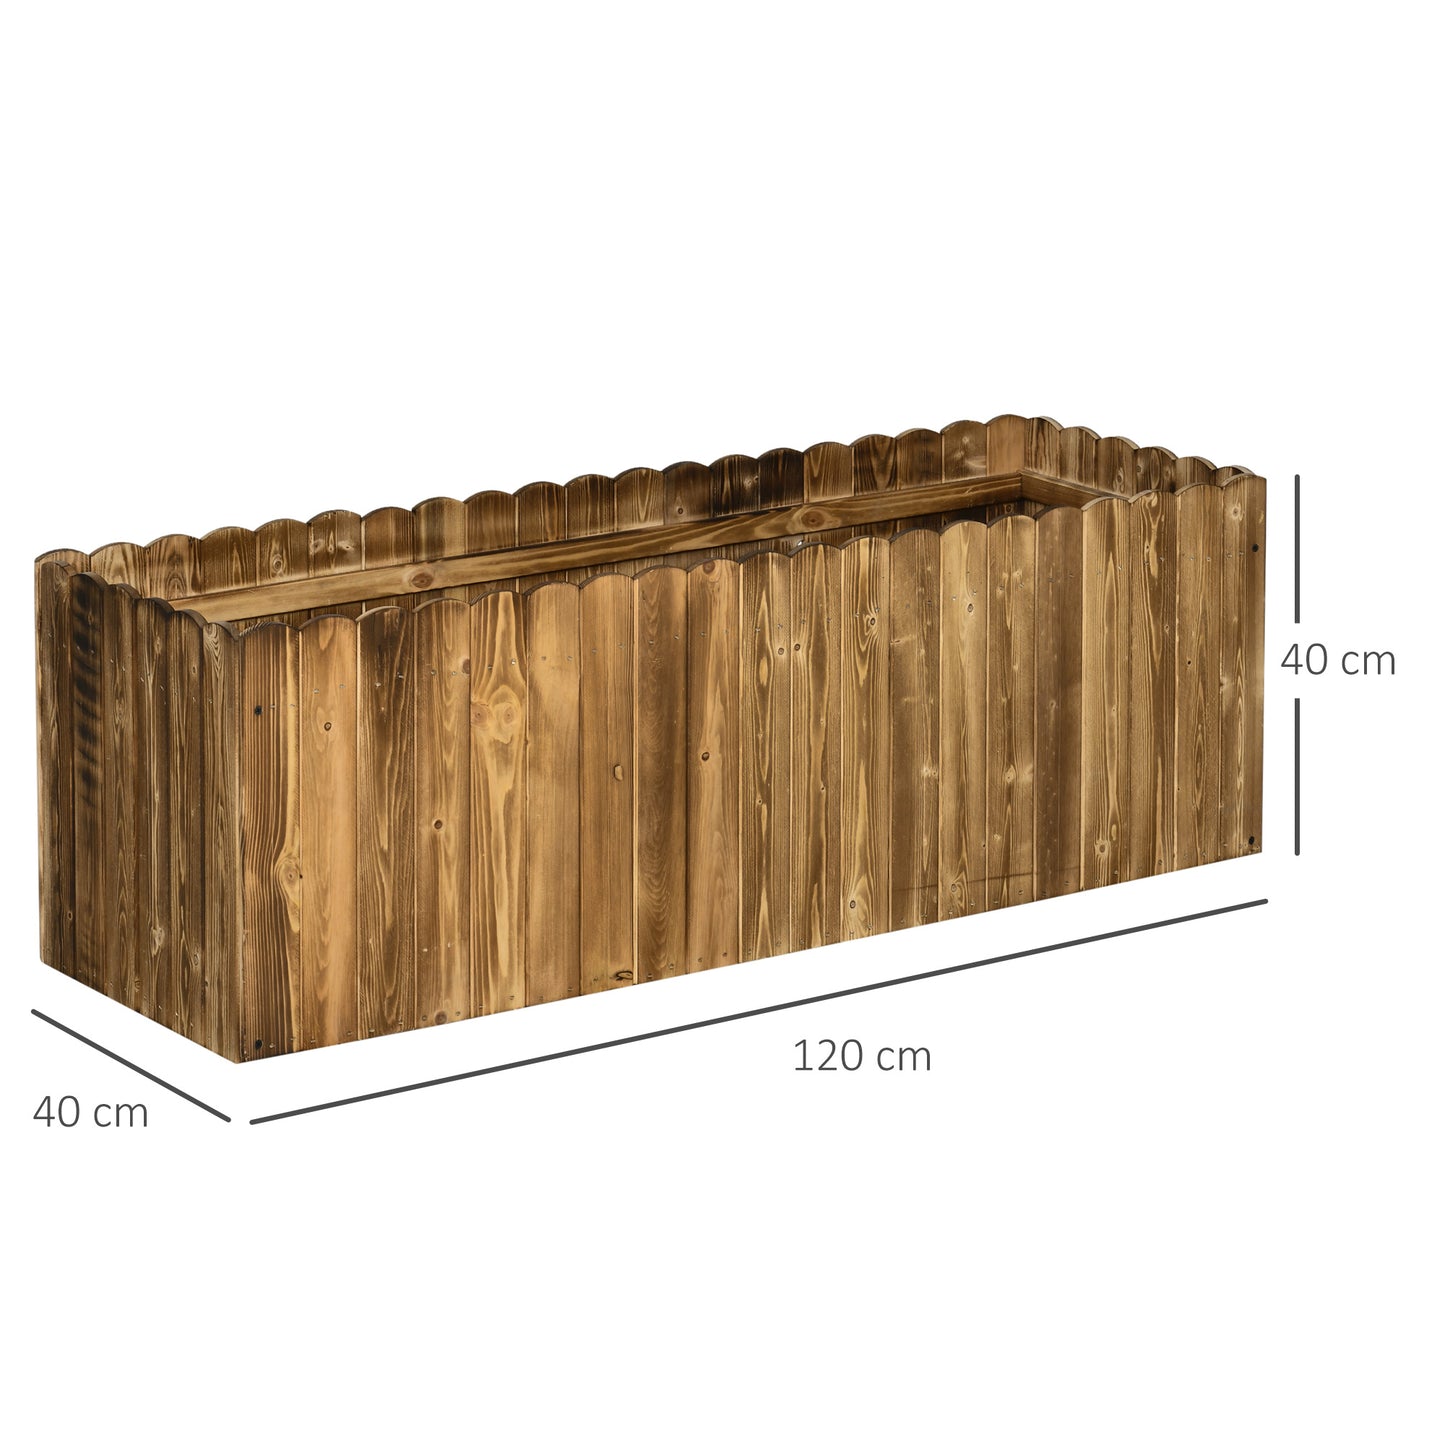 Outsunny 172L Garden Flower Raised Bed Pot Wooden Outdoor Large Rectangle Planter Vegetable Box Outdoor Herb Holder Display (120L x 40W x 40H (cm))